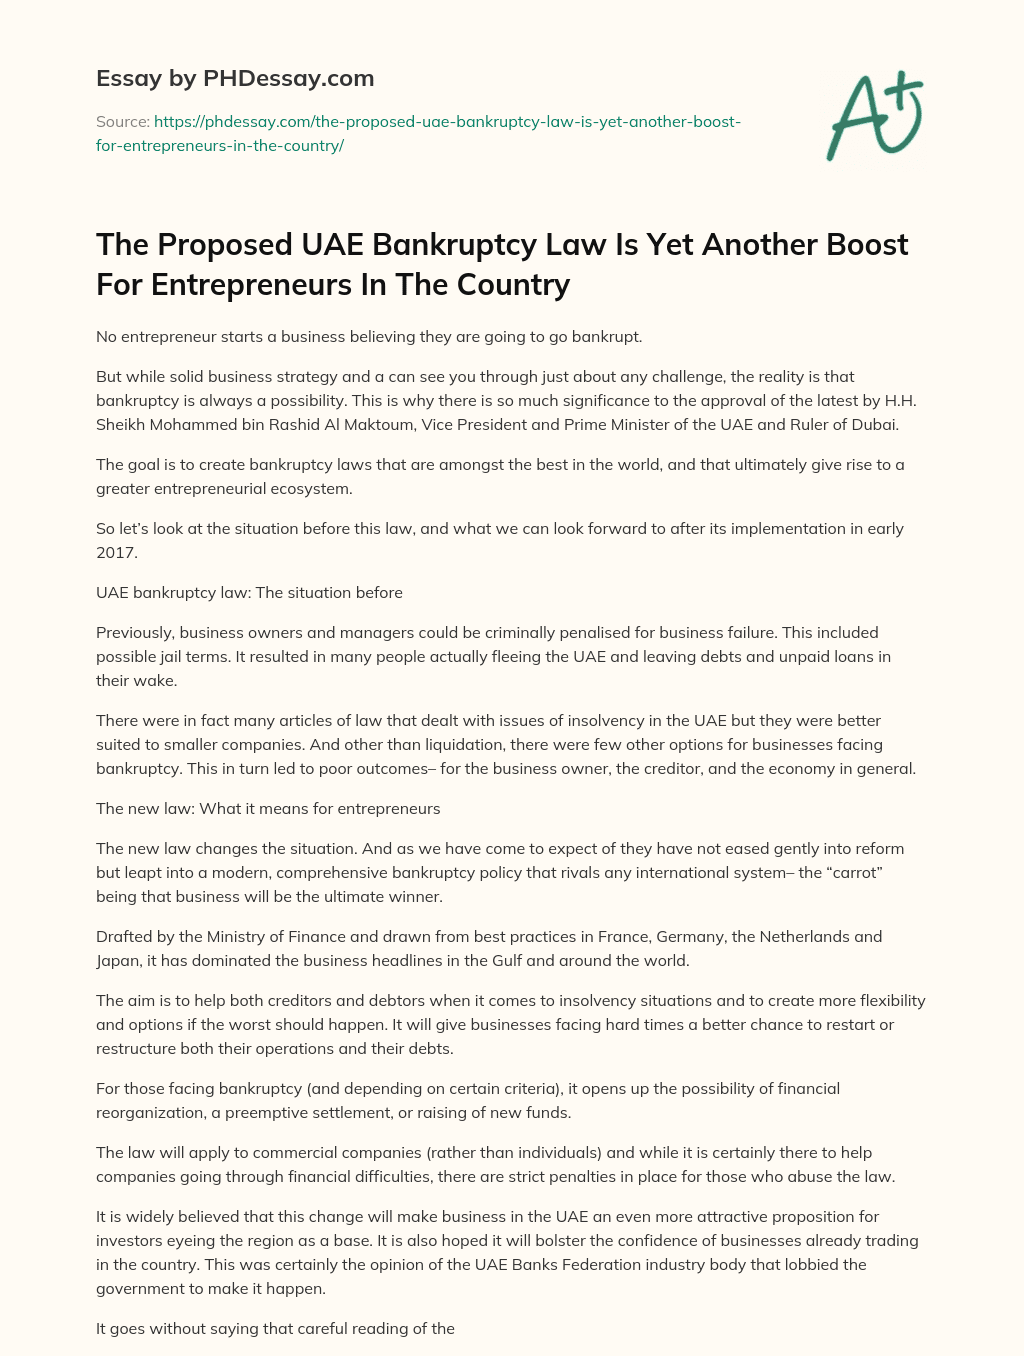 The Proposed UAE Bankruptcy Law Is Yet Another Boost For Entrepreneurs In The Country essay